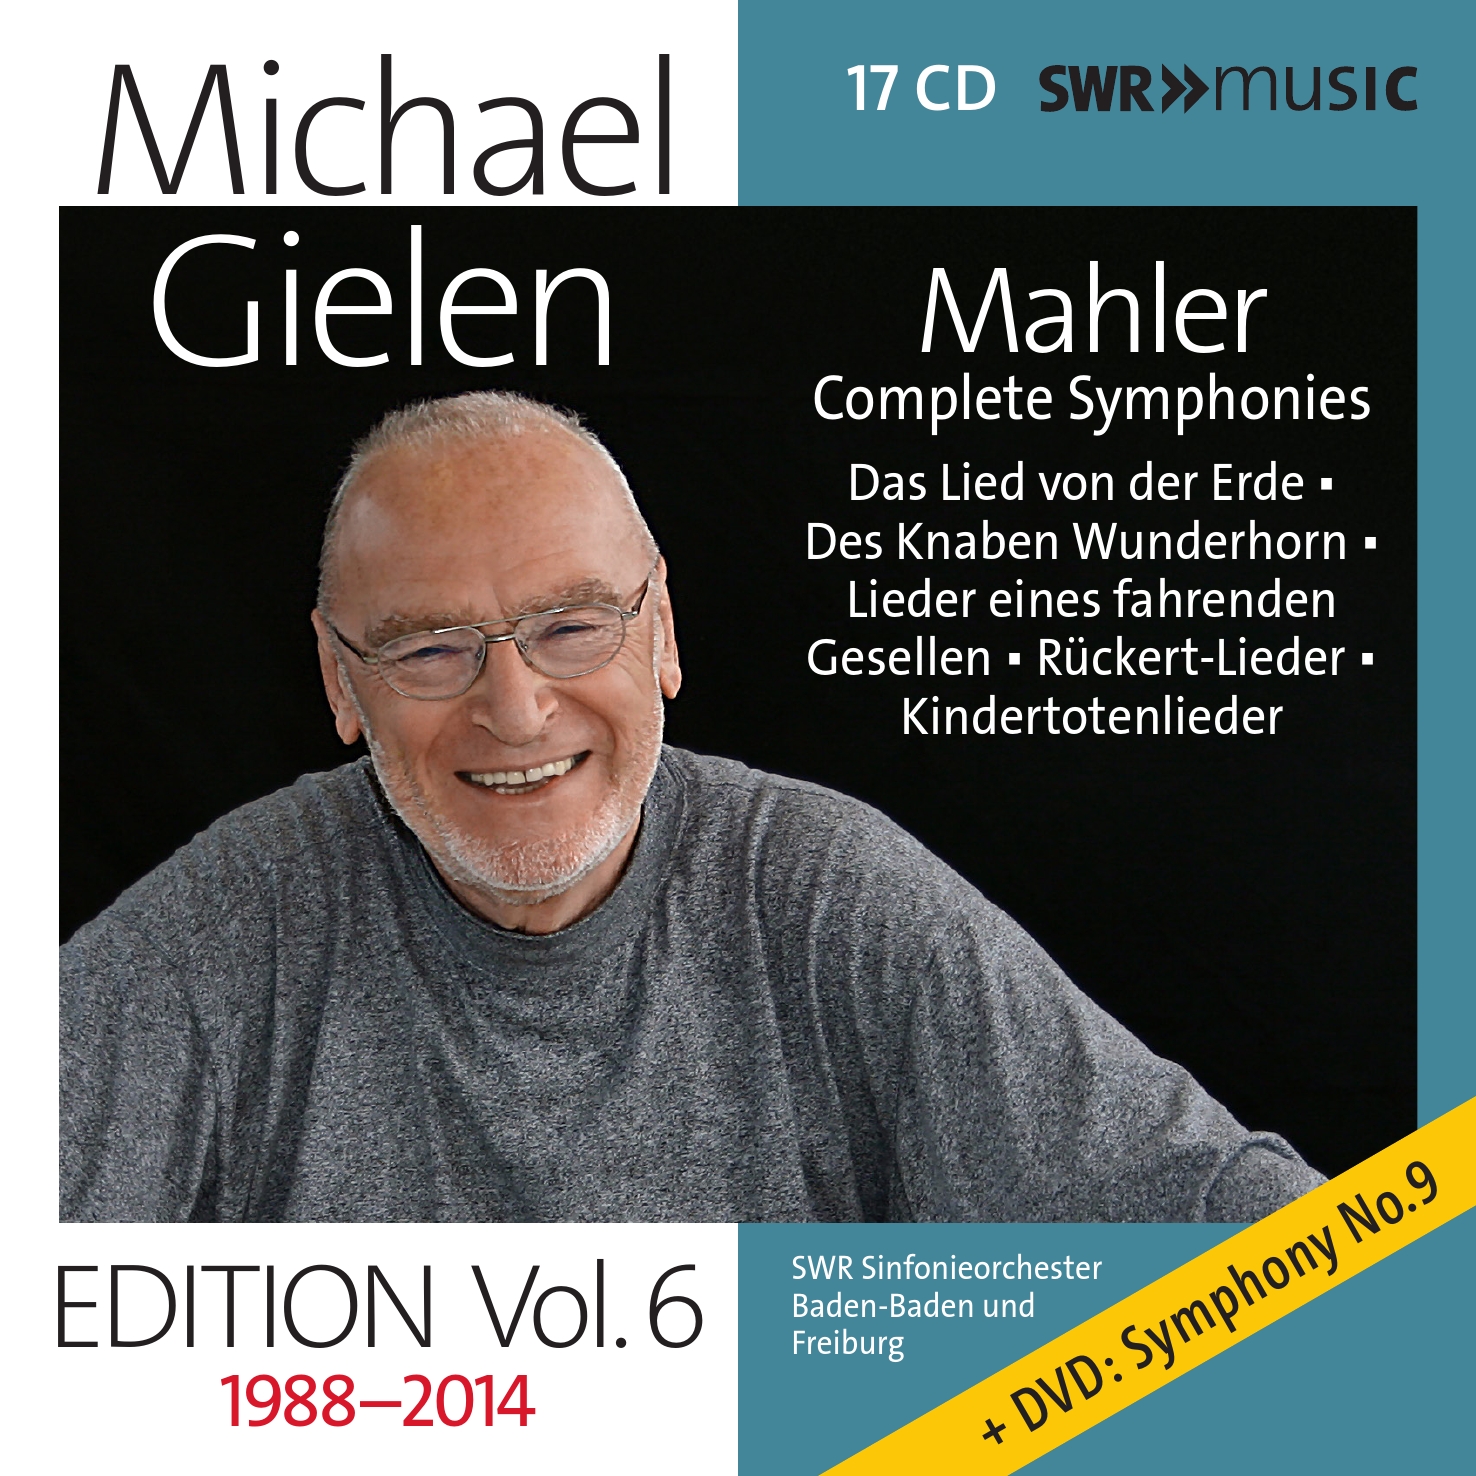 Michael Gielen Ed - Vol 6 Mahler Symphonies and. Song Cycles Recorded 1988-2014 cd10